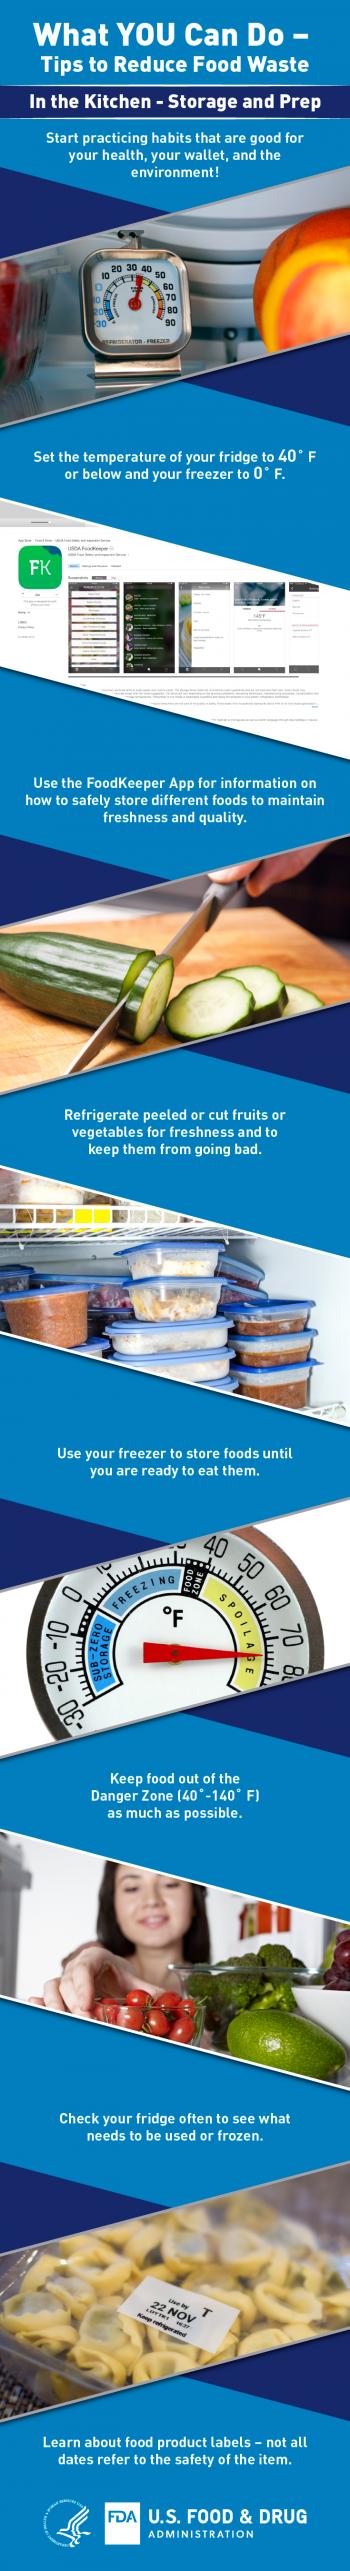 Tips to Reduce Food Waste in the Kitchen (Infographic)